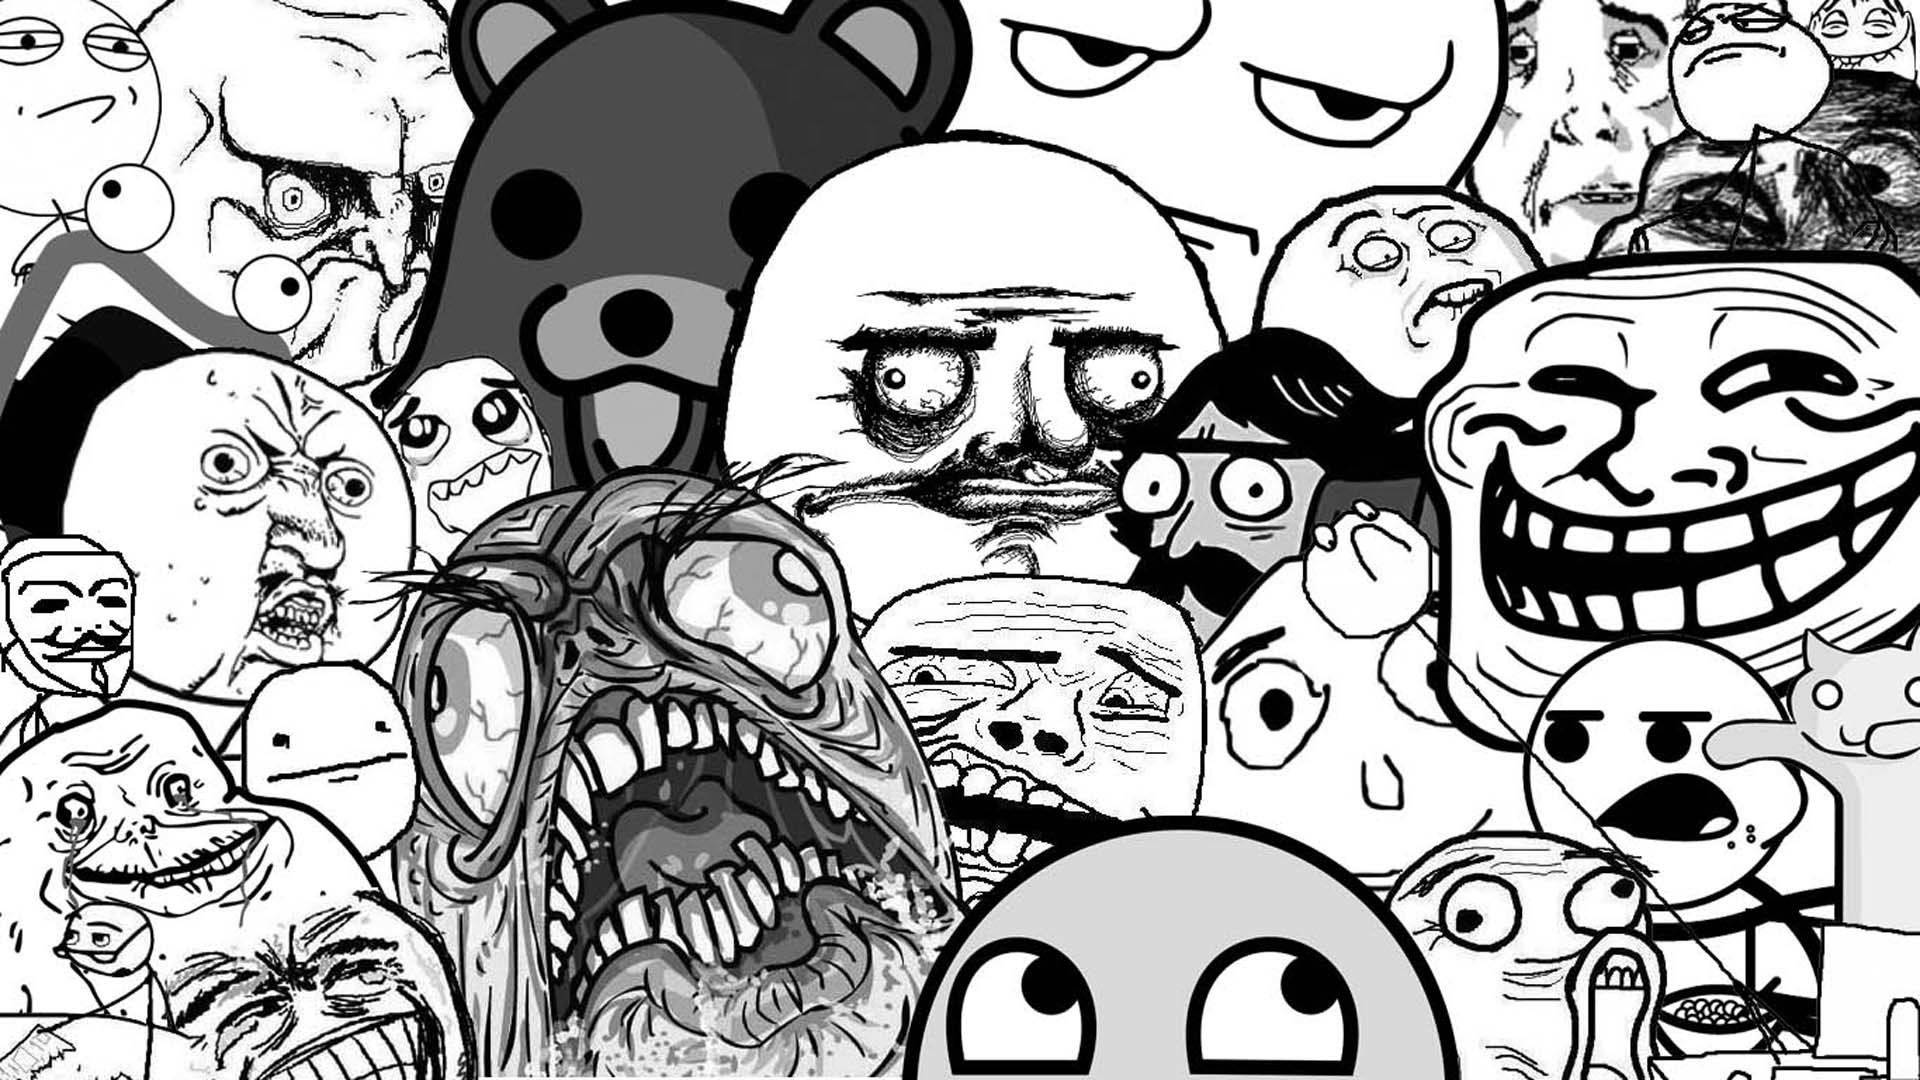 Background full of funny expression memes showing smiling, angry and sad. 